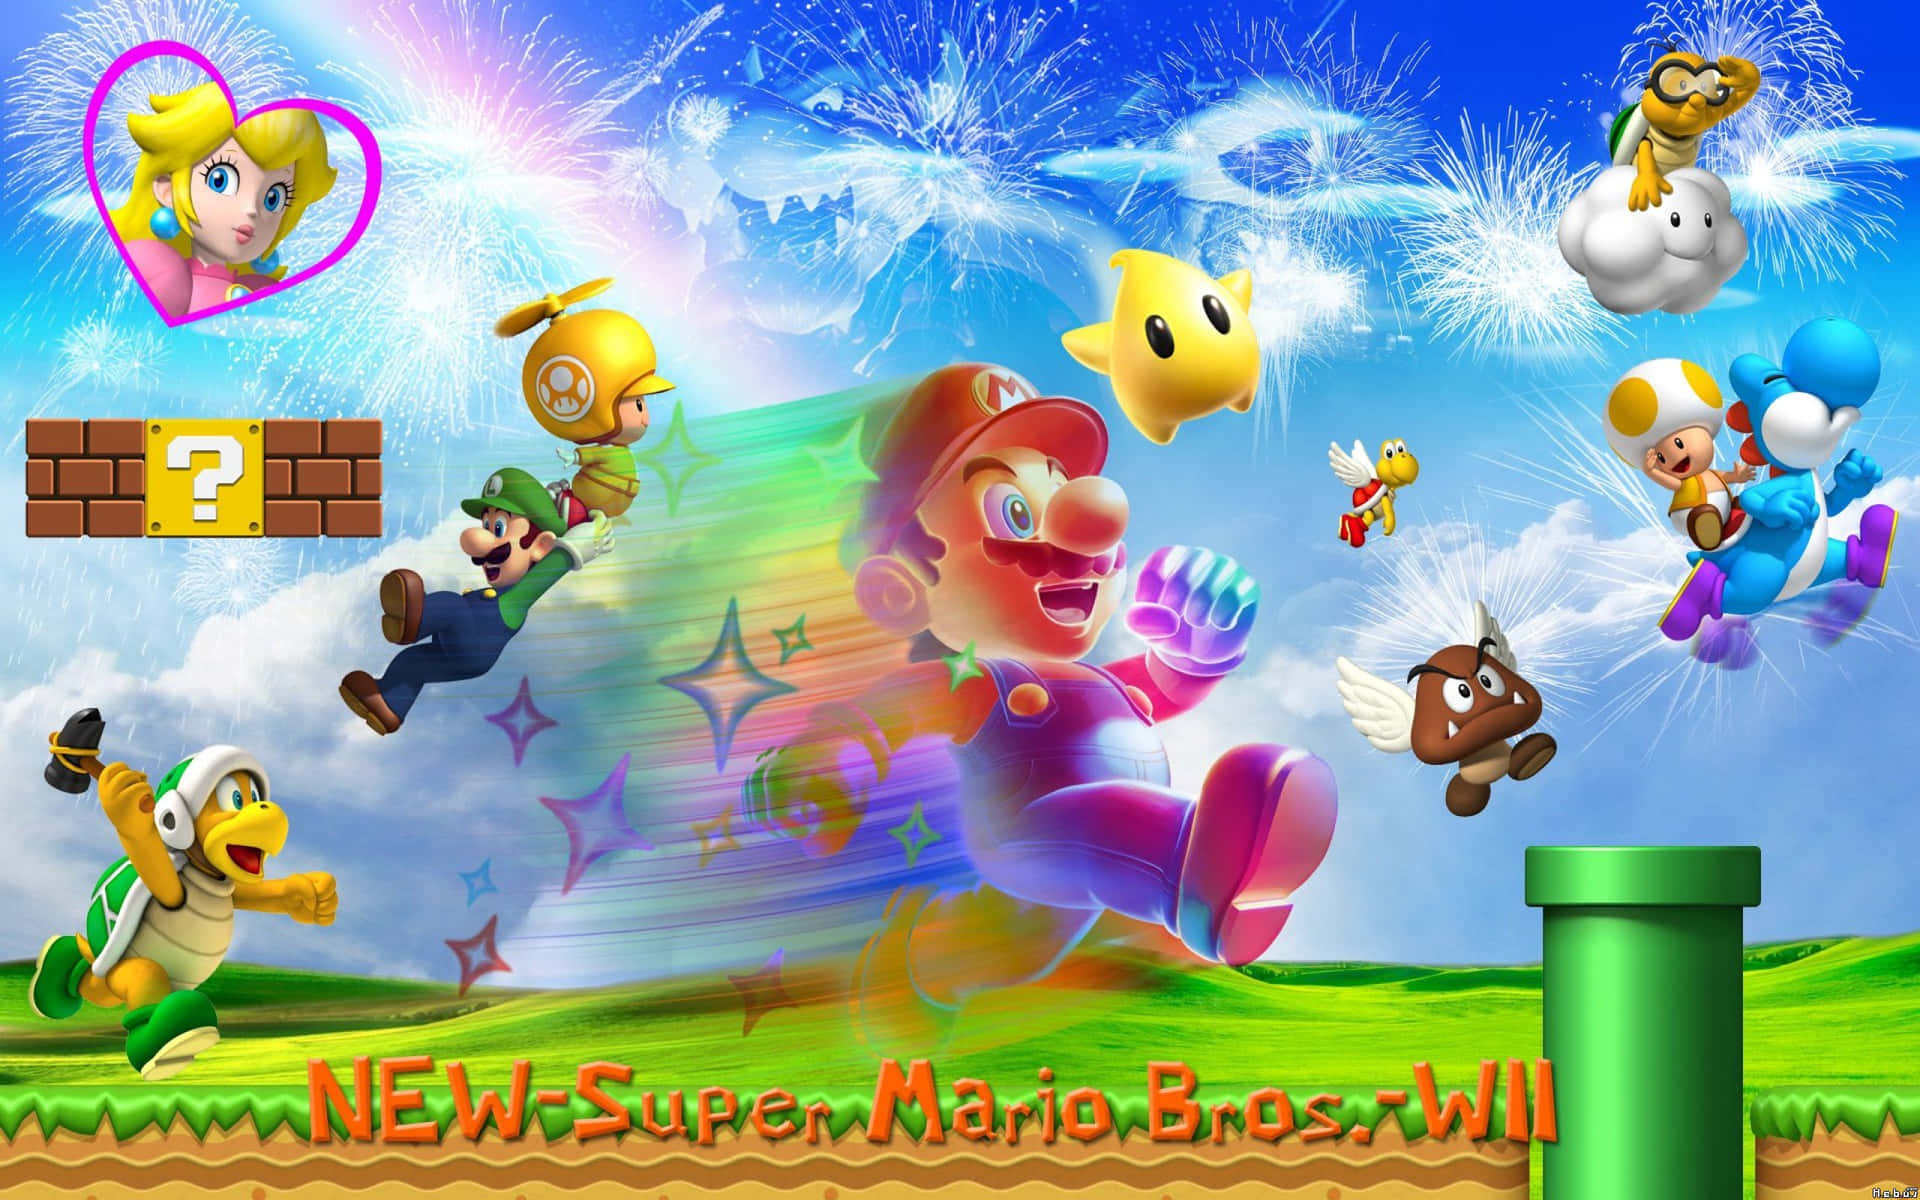 Exciting Adventure with Super Mario Bros 2 Characters Wallpaper